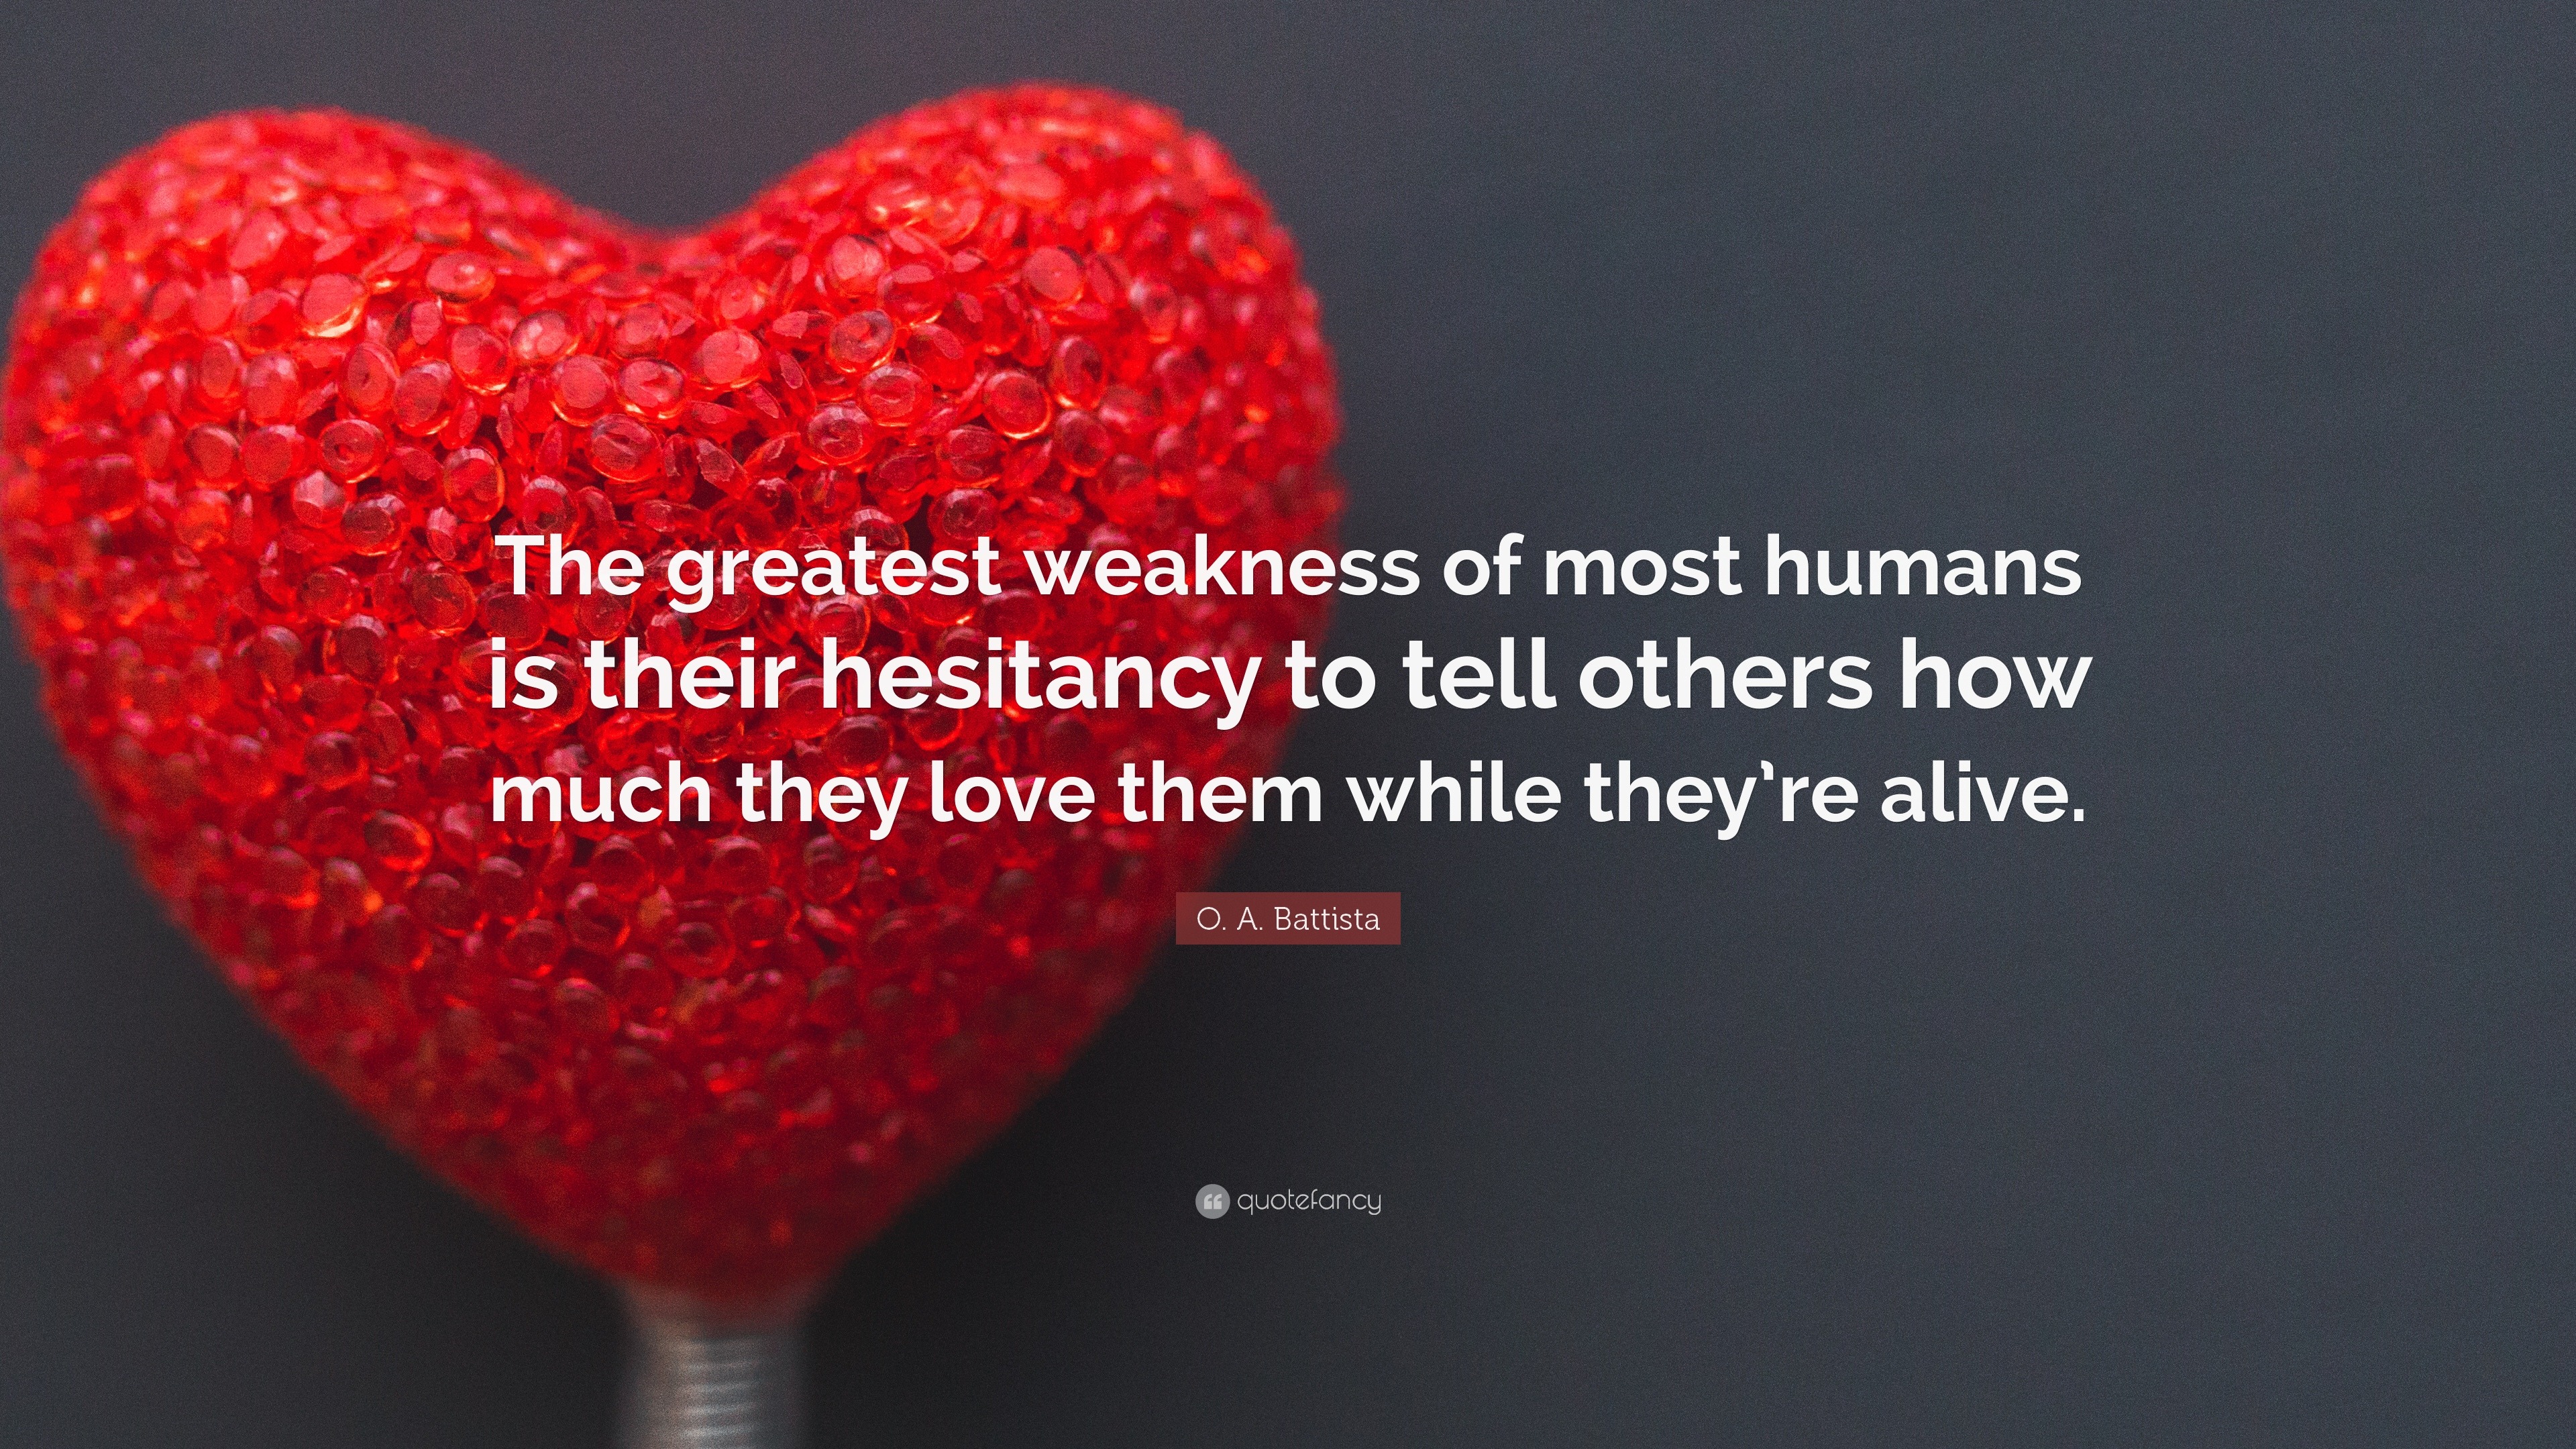 O A Battista Quote “The greatest weakness of most humans is their hesitancy to tell